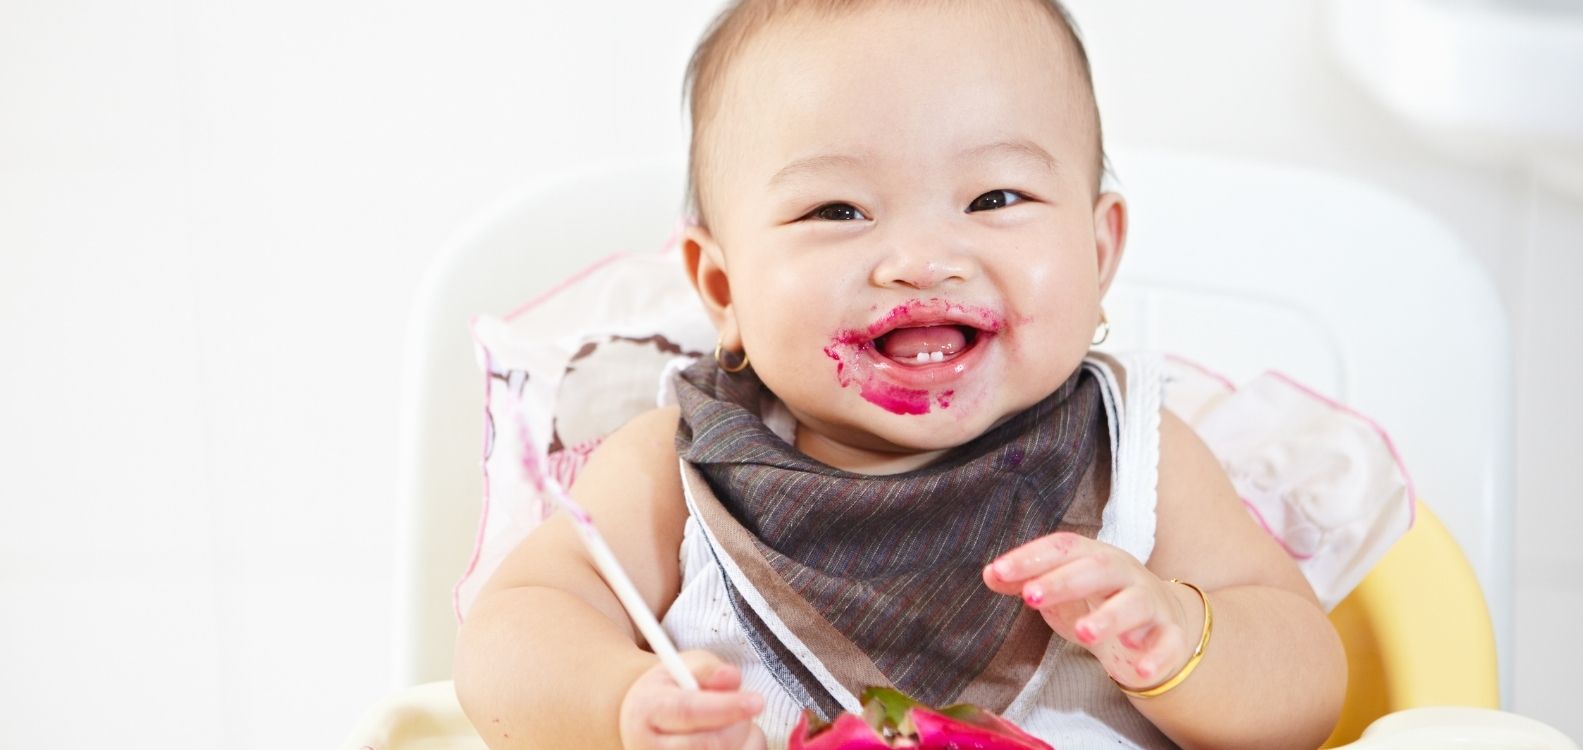 Plant based diets for babies